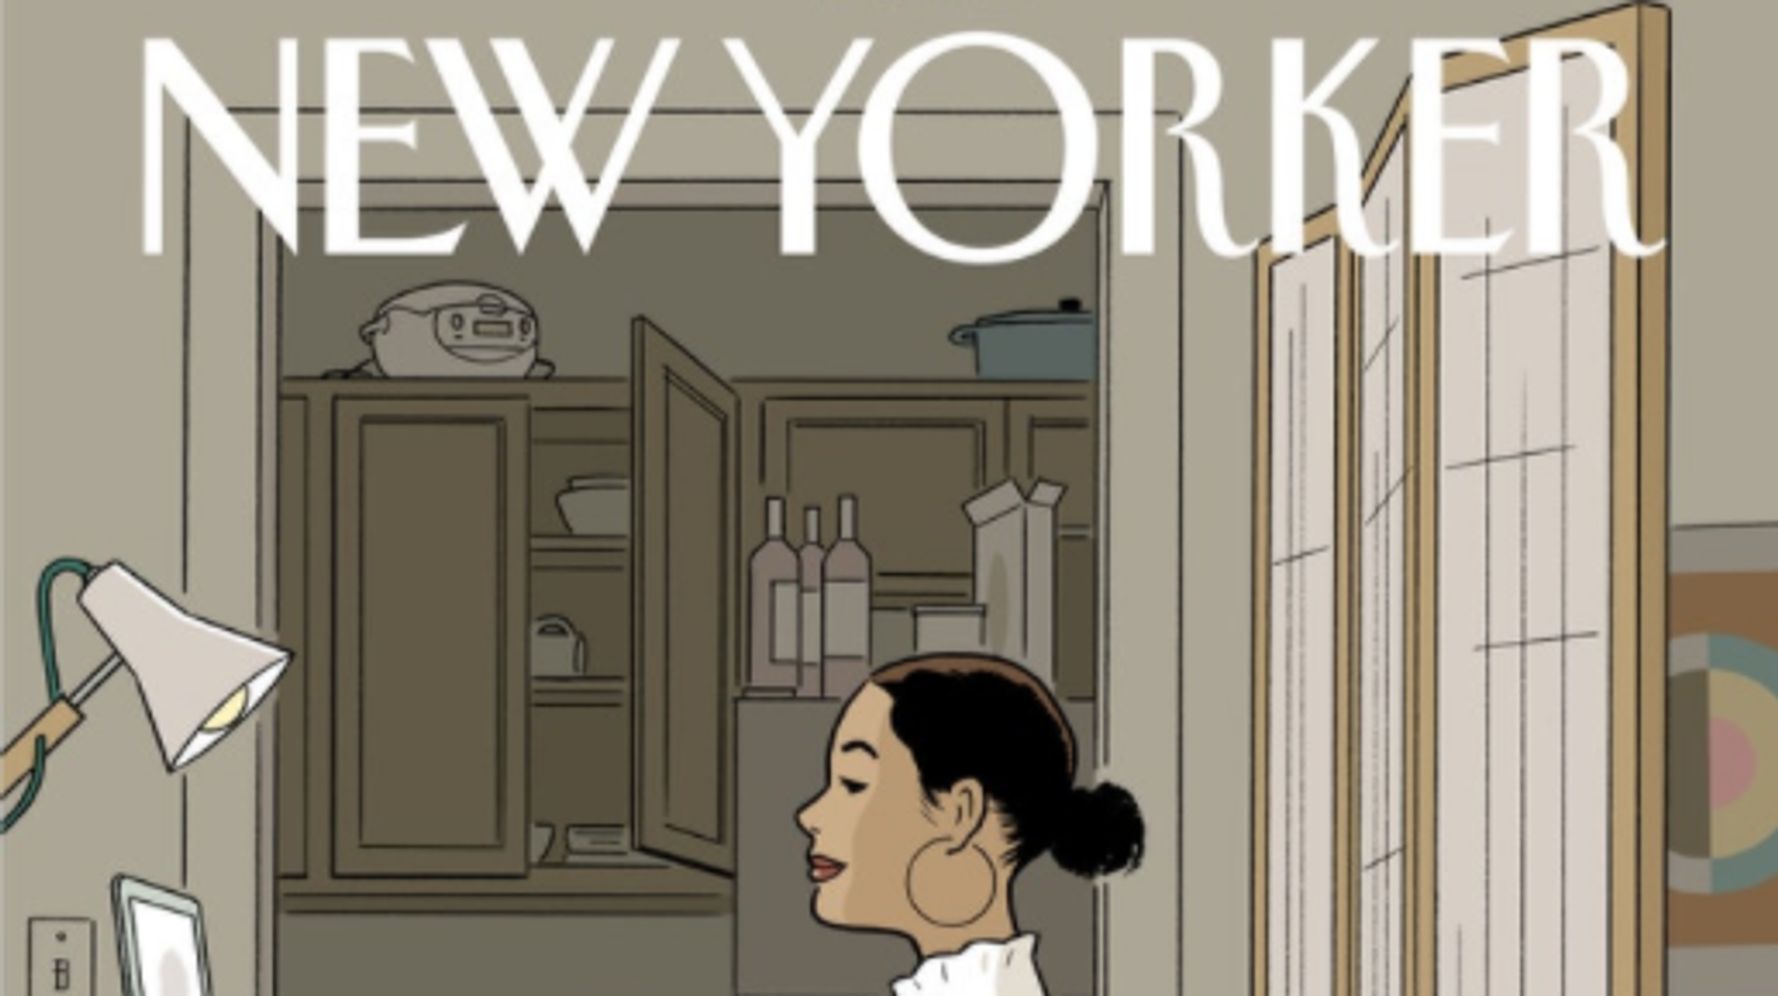 New Yorker Cover Goes Viral Because It’s ‘So Damn Relatable’ For 2020